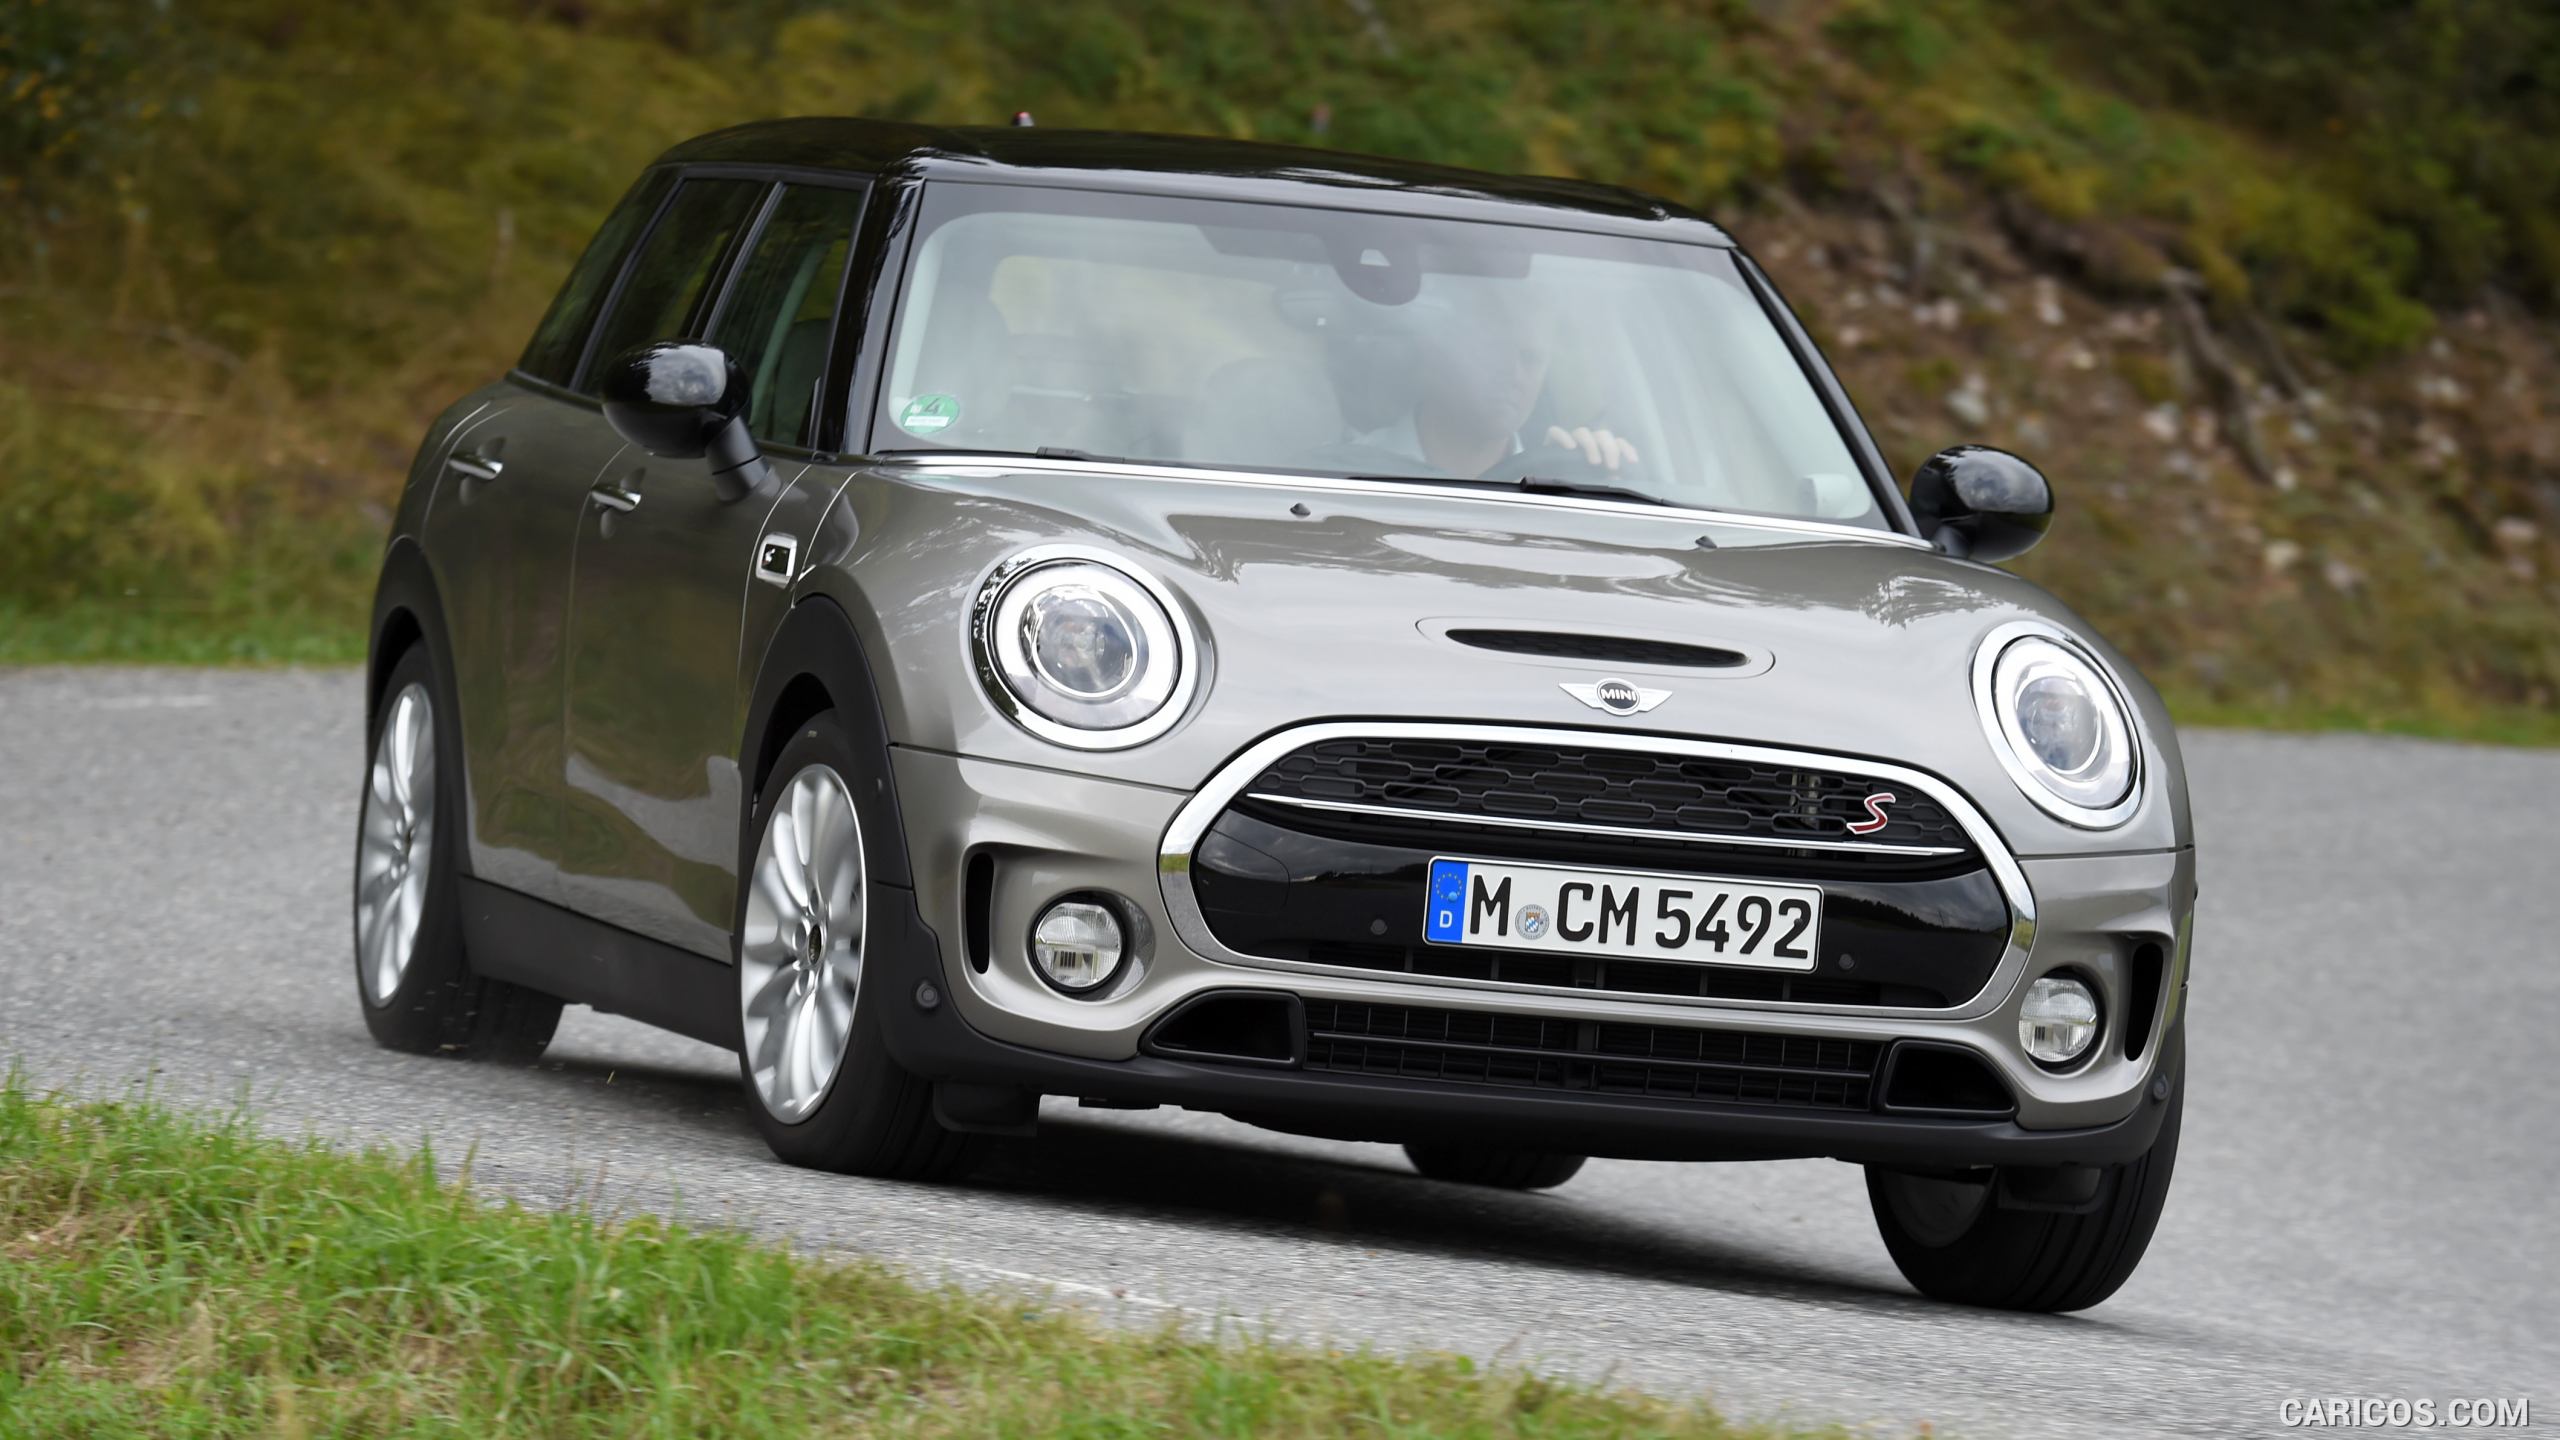 2016 MINI Cooper S Clubman in Metallic Melting Silver - Front, #129 of 380